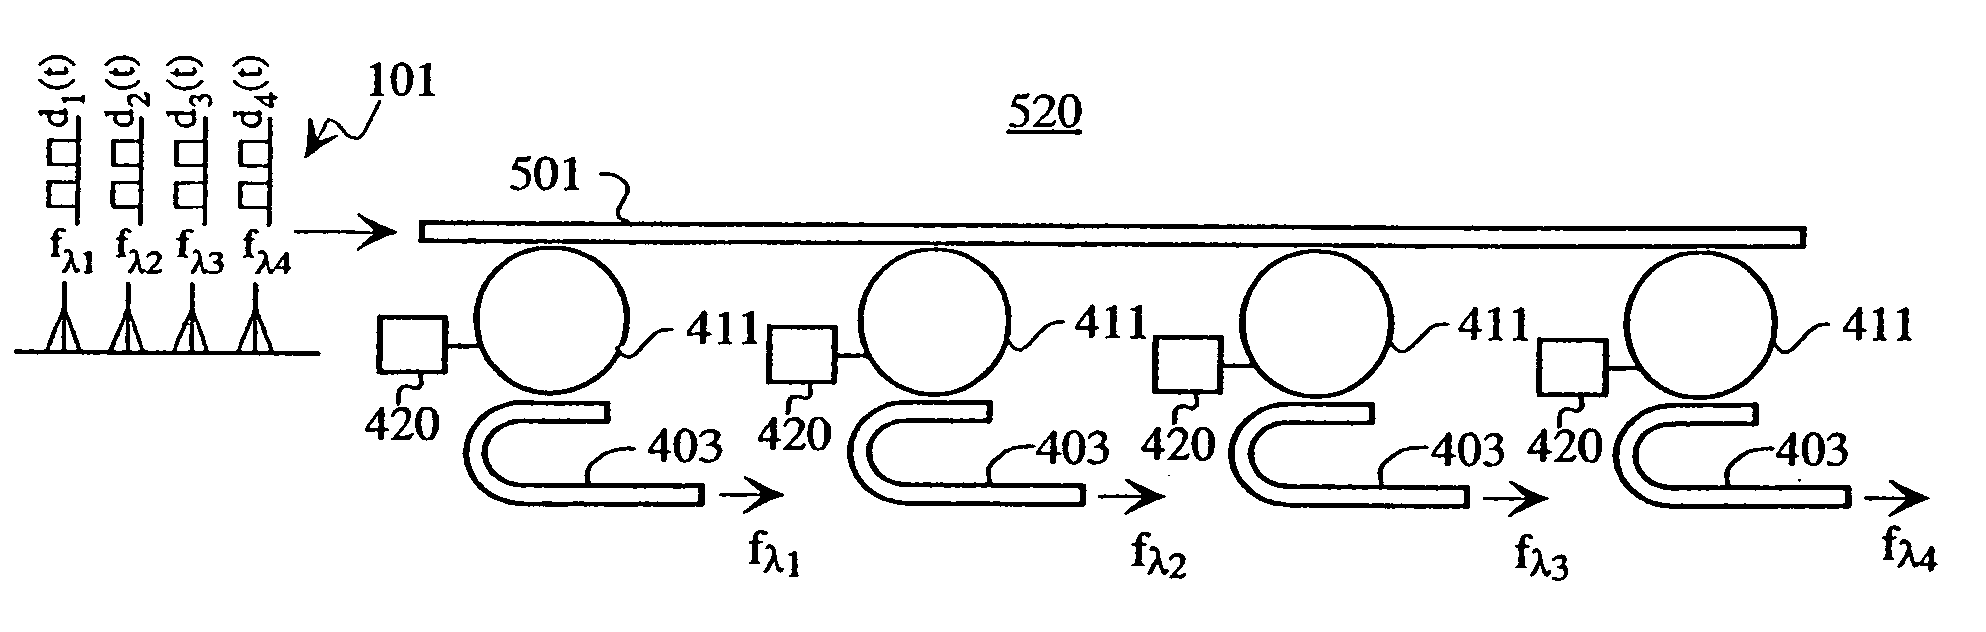 Optical channelizer utilizing resonant microsphere coupling